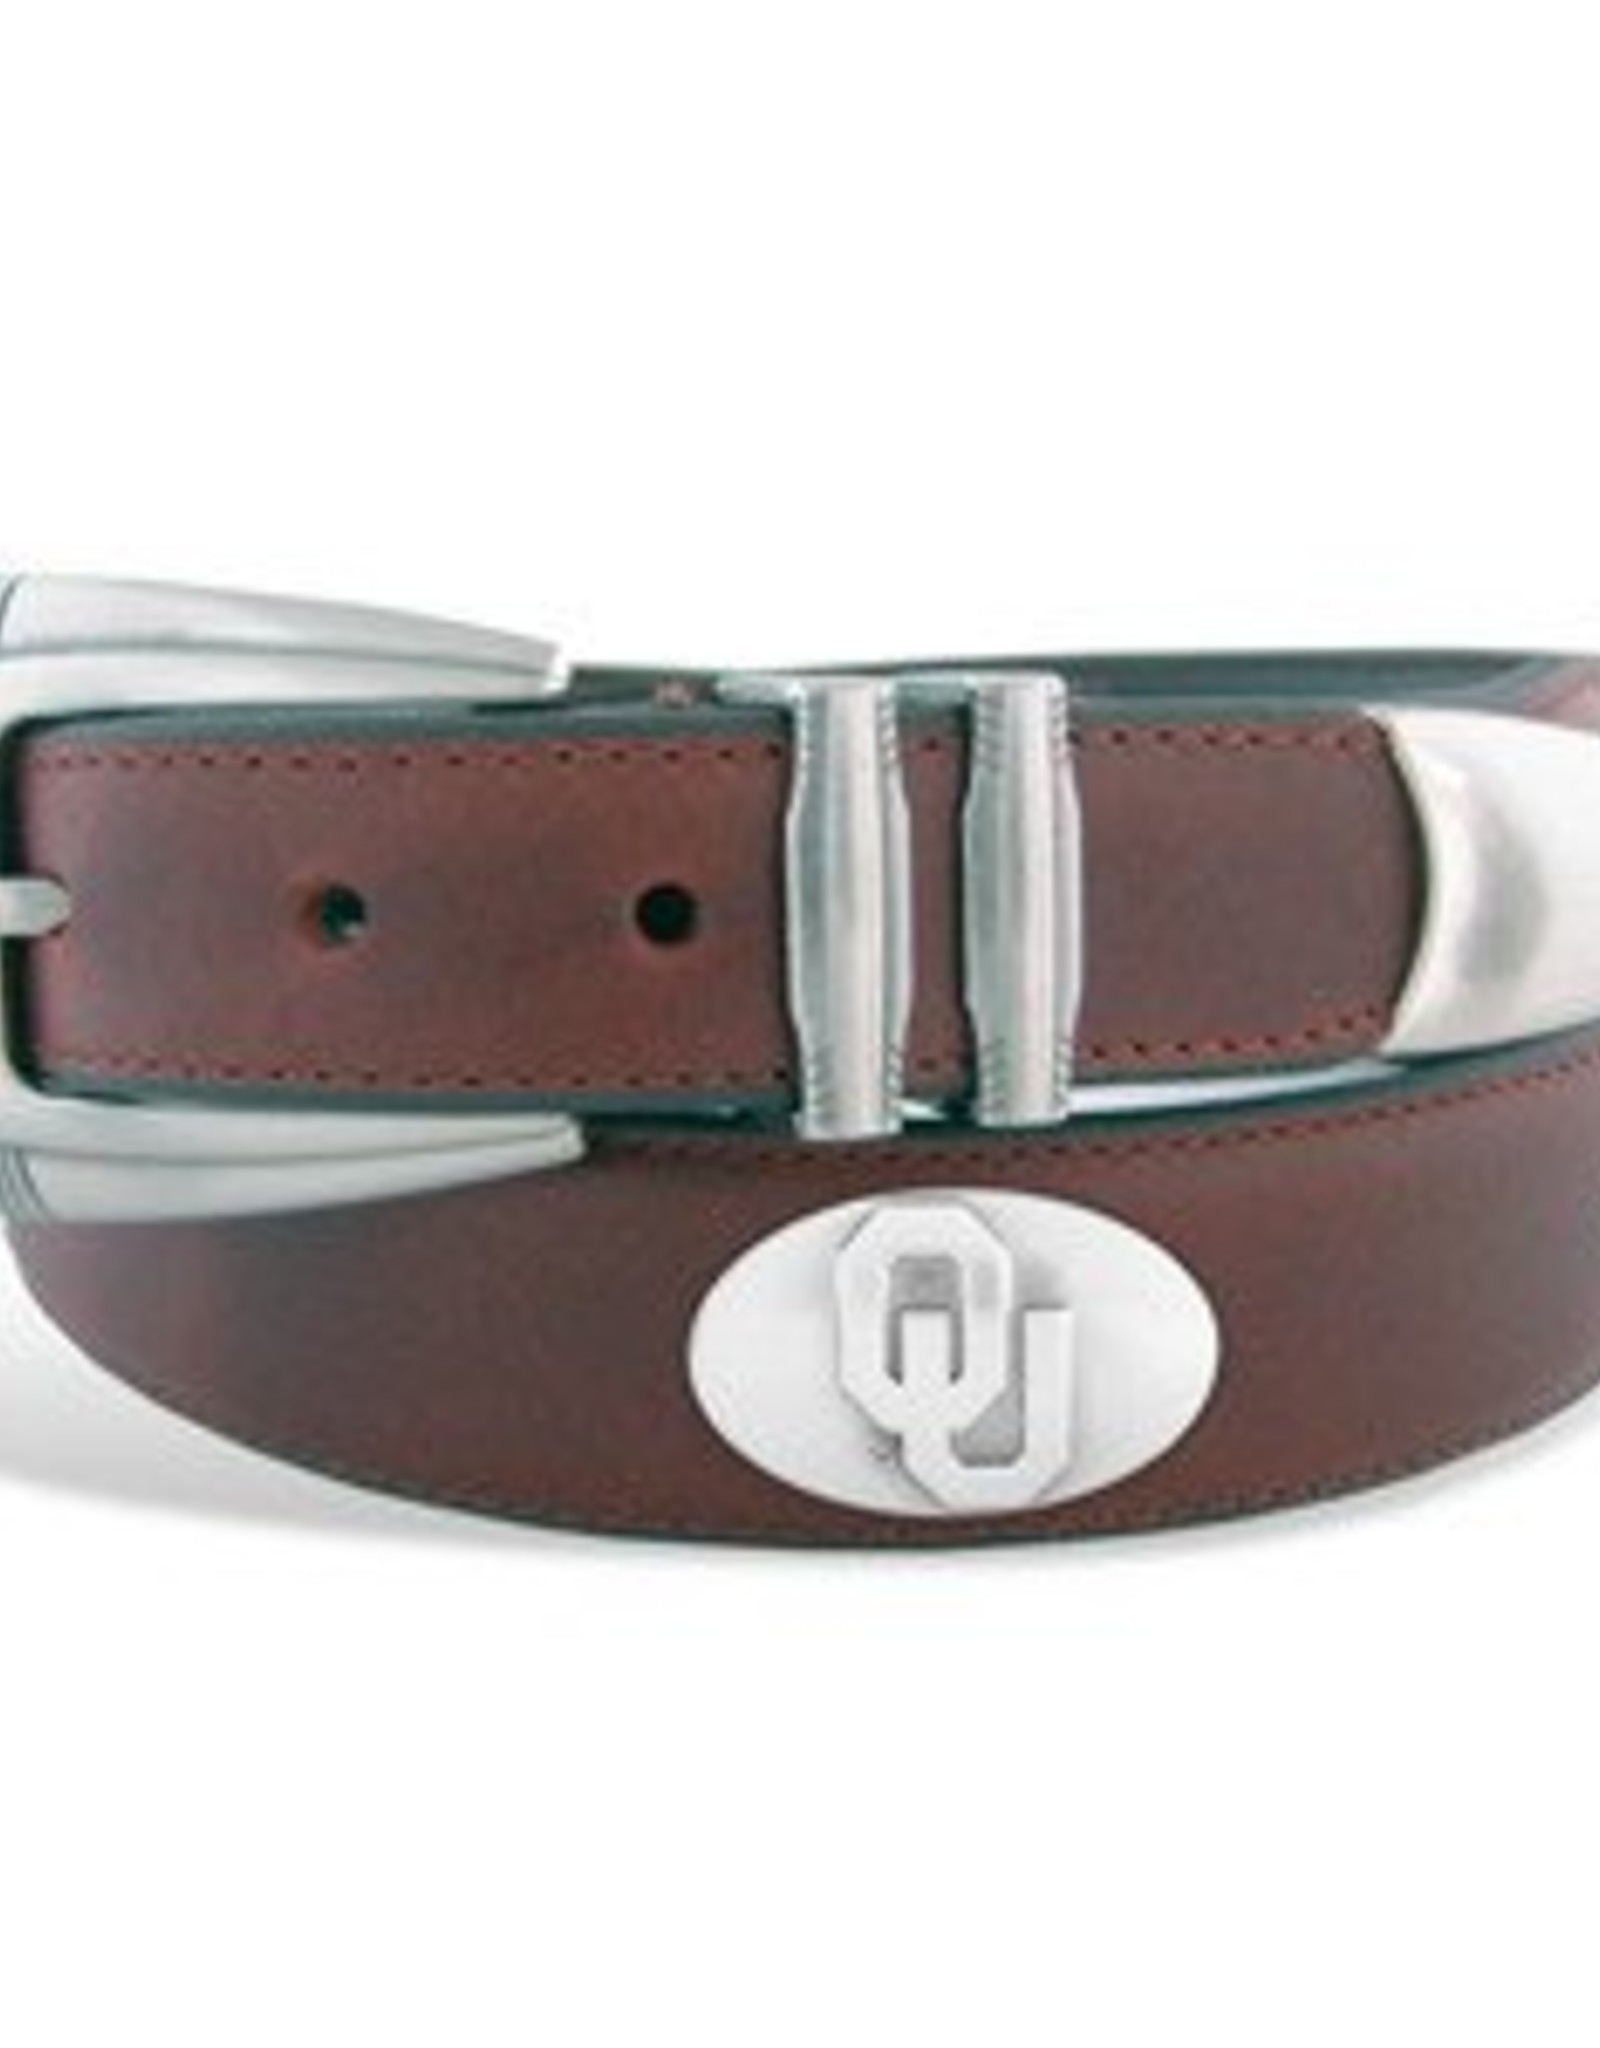 NCAA Texas A&M Aggies Zep-Pro Leather Concho Belt 